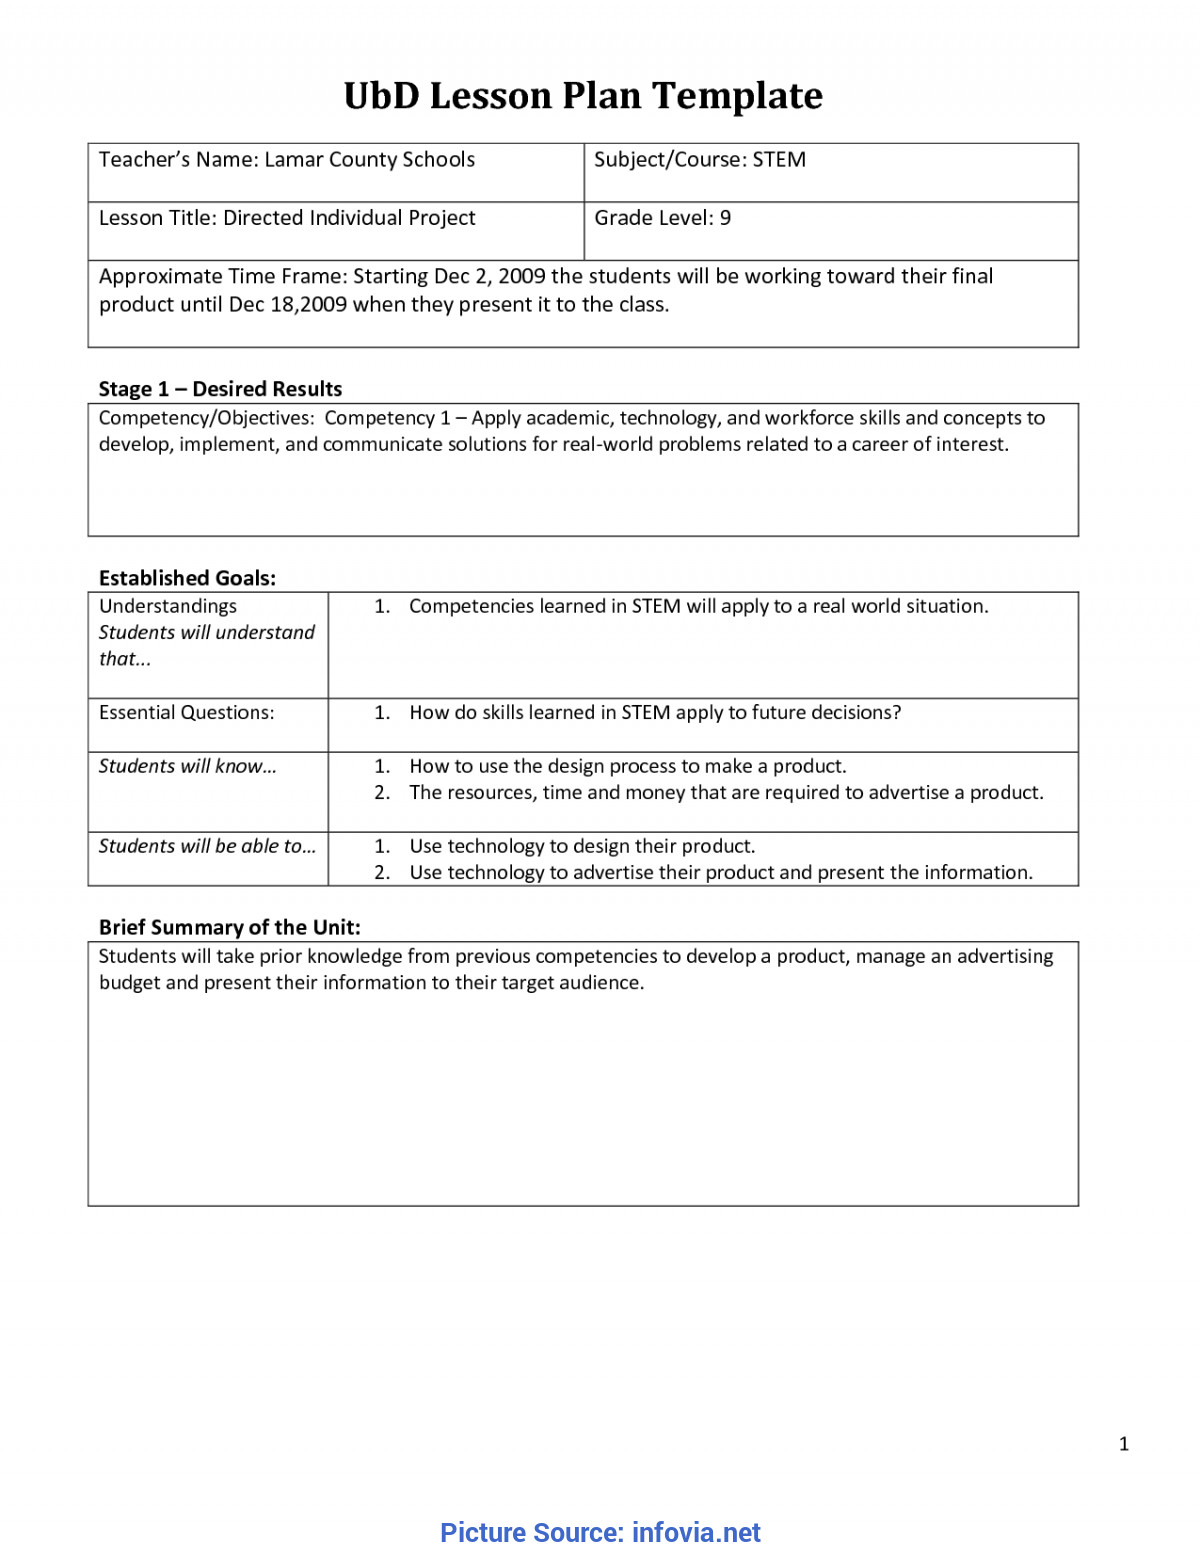 Ubd Lesson Plan Template Useful Lesson Plan Template Vic 23 Ubd Lesson